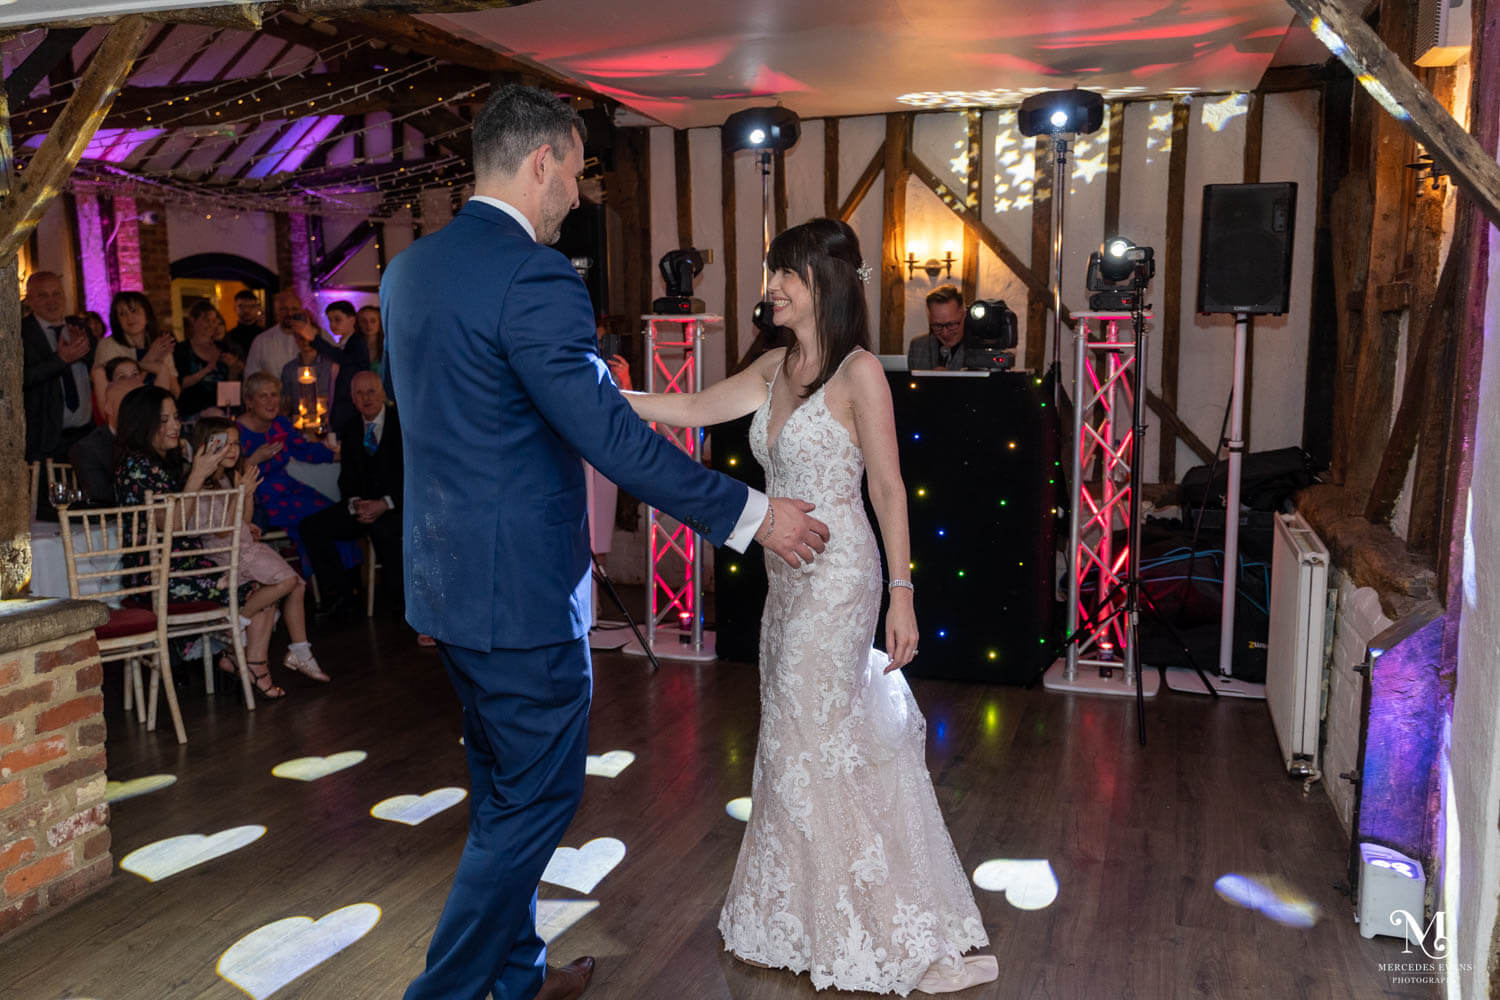 the bride and groom enjoy their first dance at their wedding